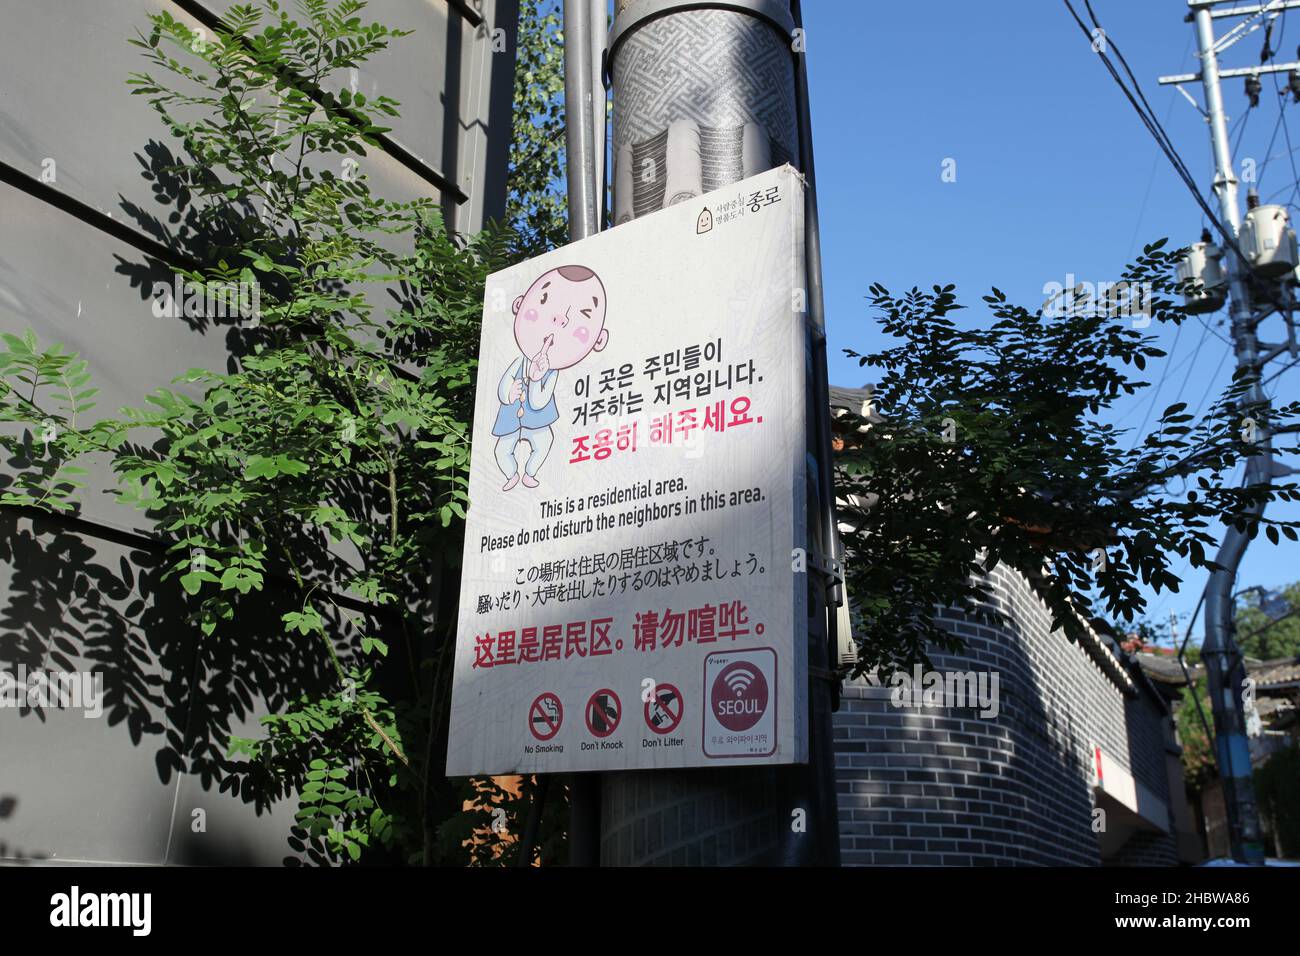 A notice sign in Bukchon Village reminding people that this is a residential area and to not disturb the neighbors in this area. Stock Photo